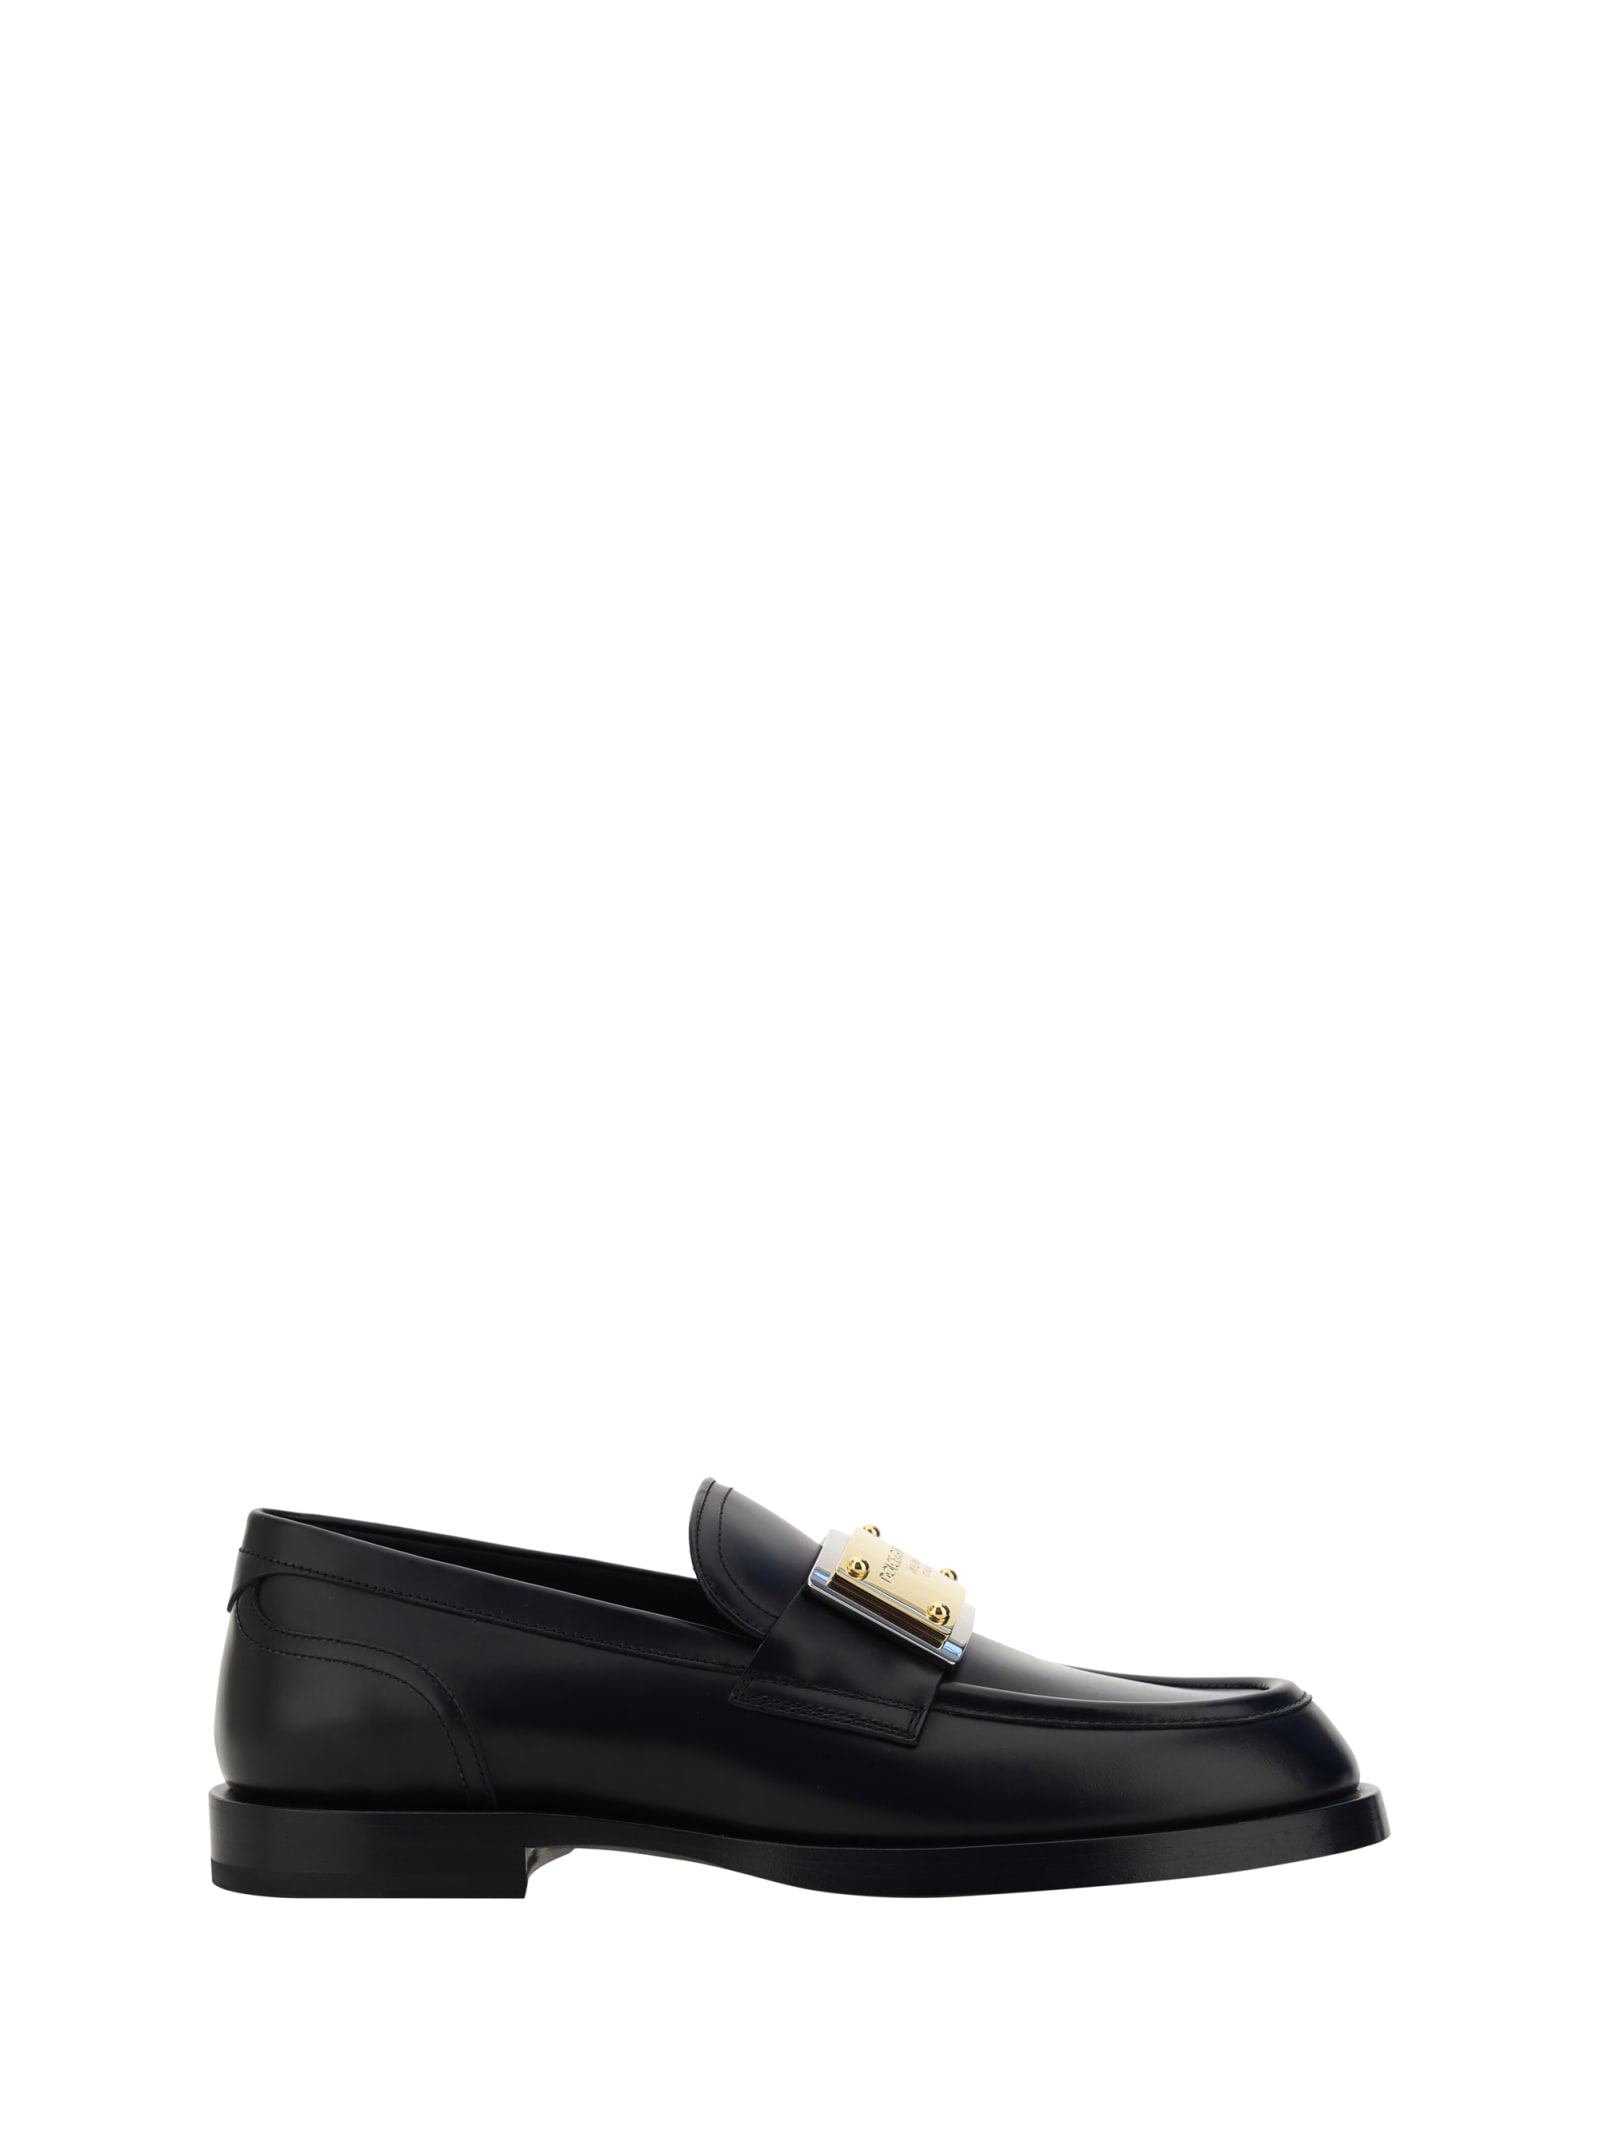 Dolce & Gabbana Loafers In White